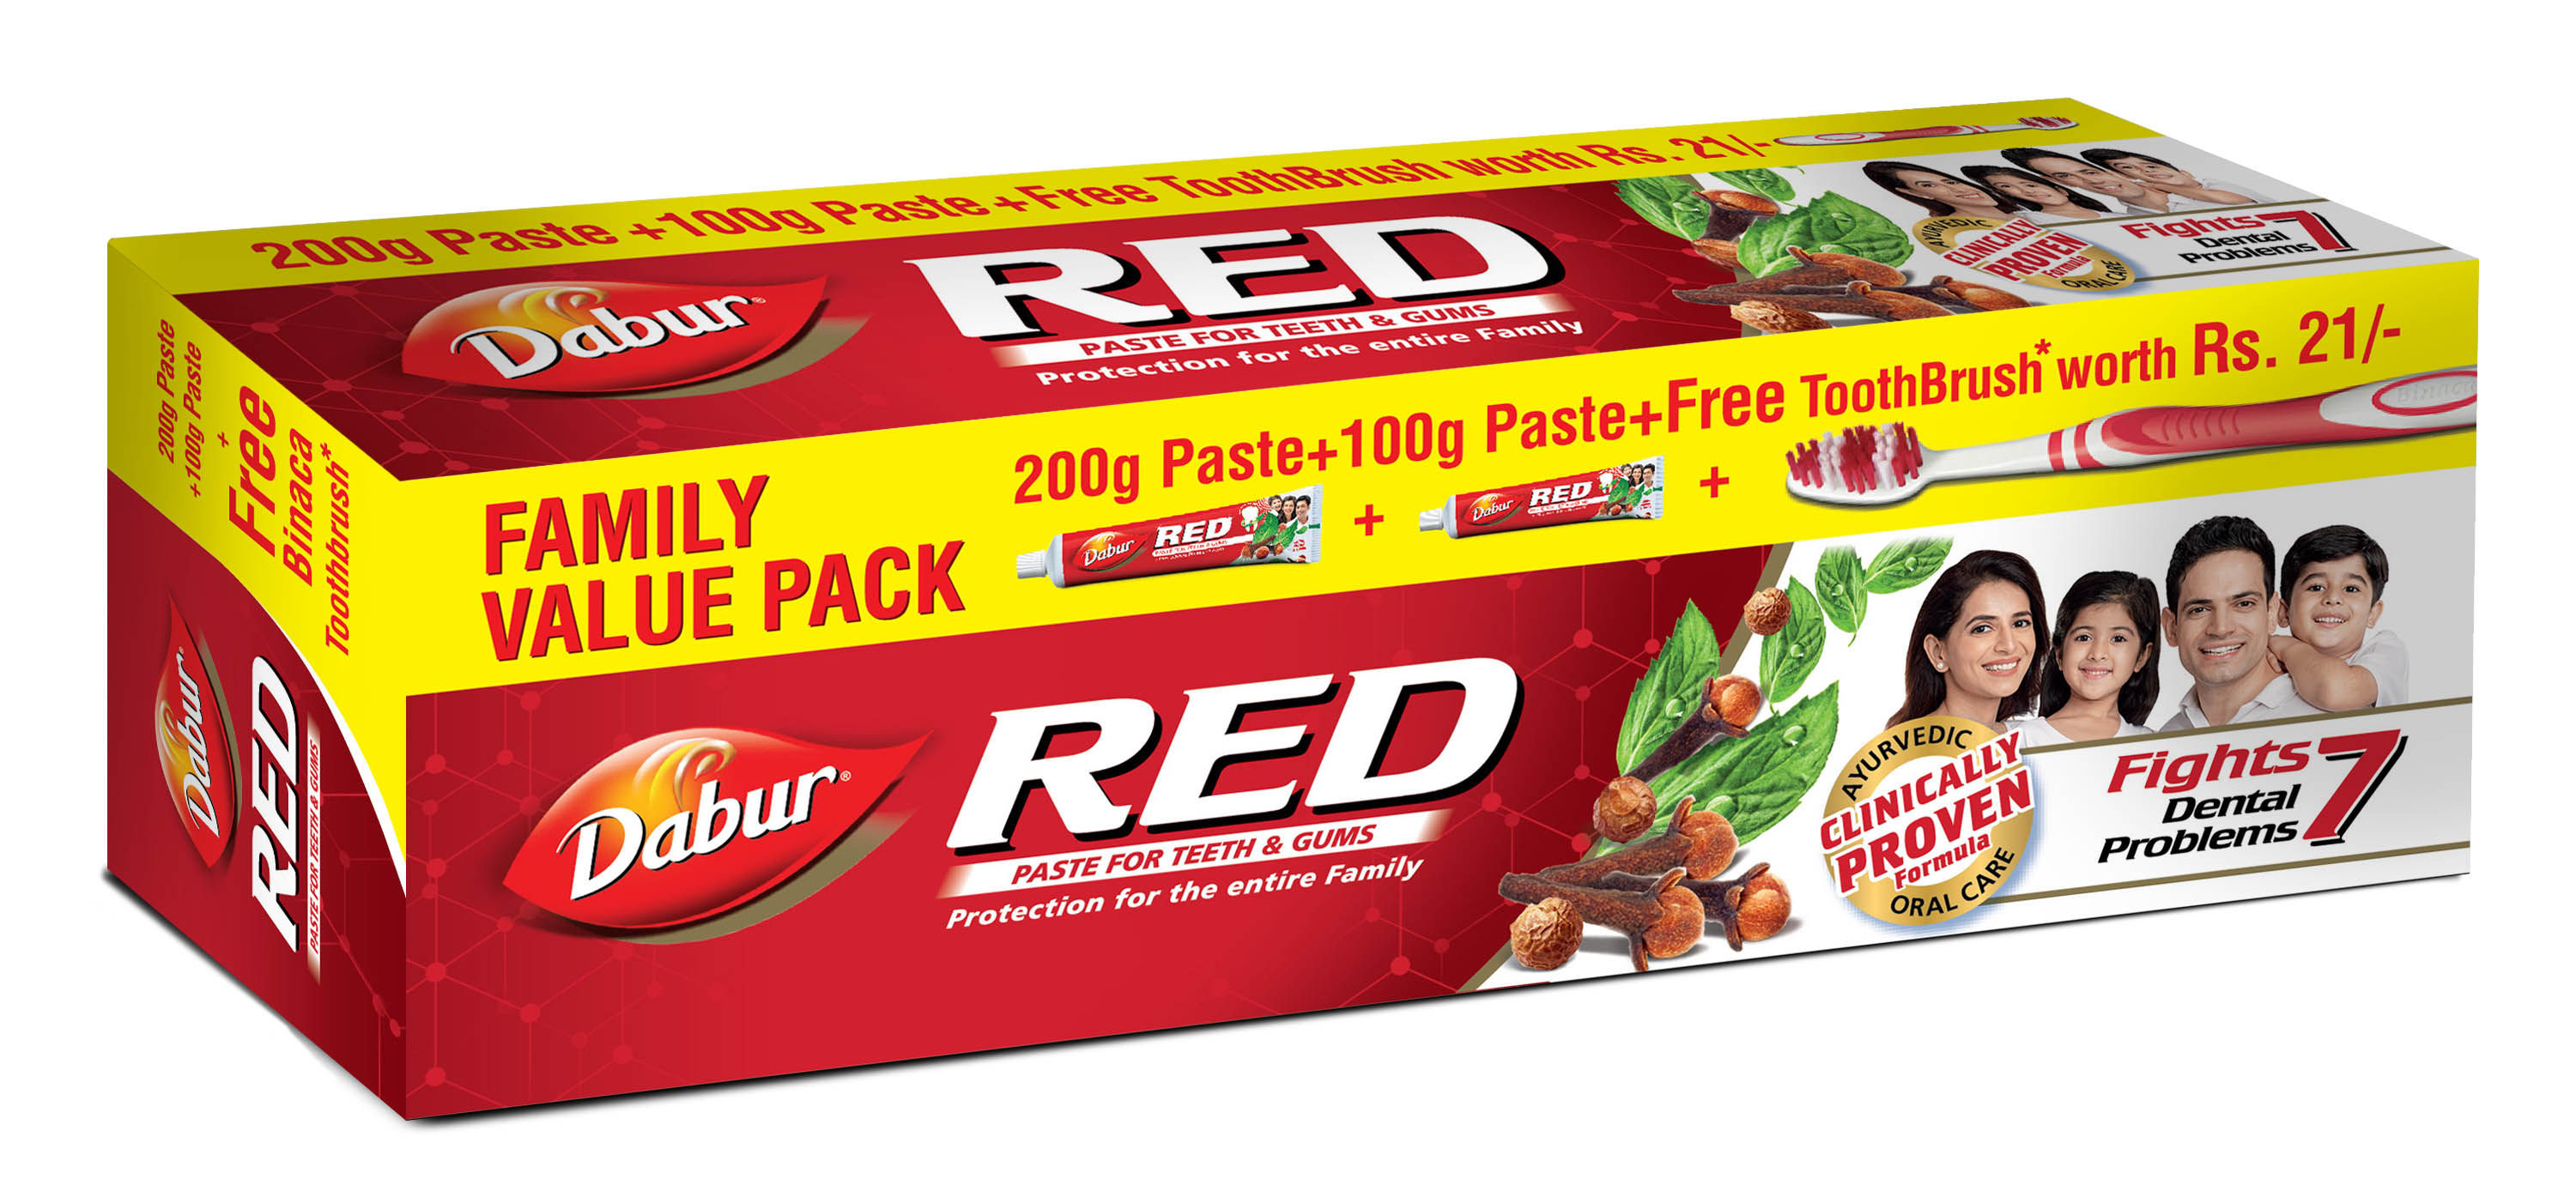 Dabur Red Toothpaste Family Value Pack With Free Toothbrush